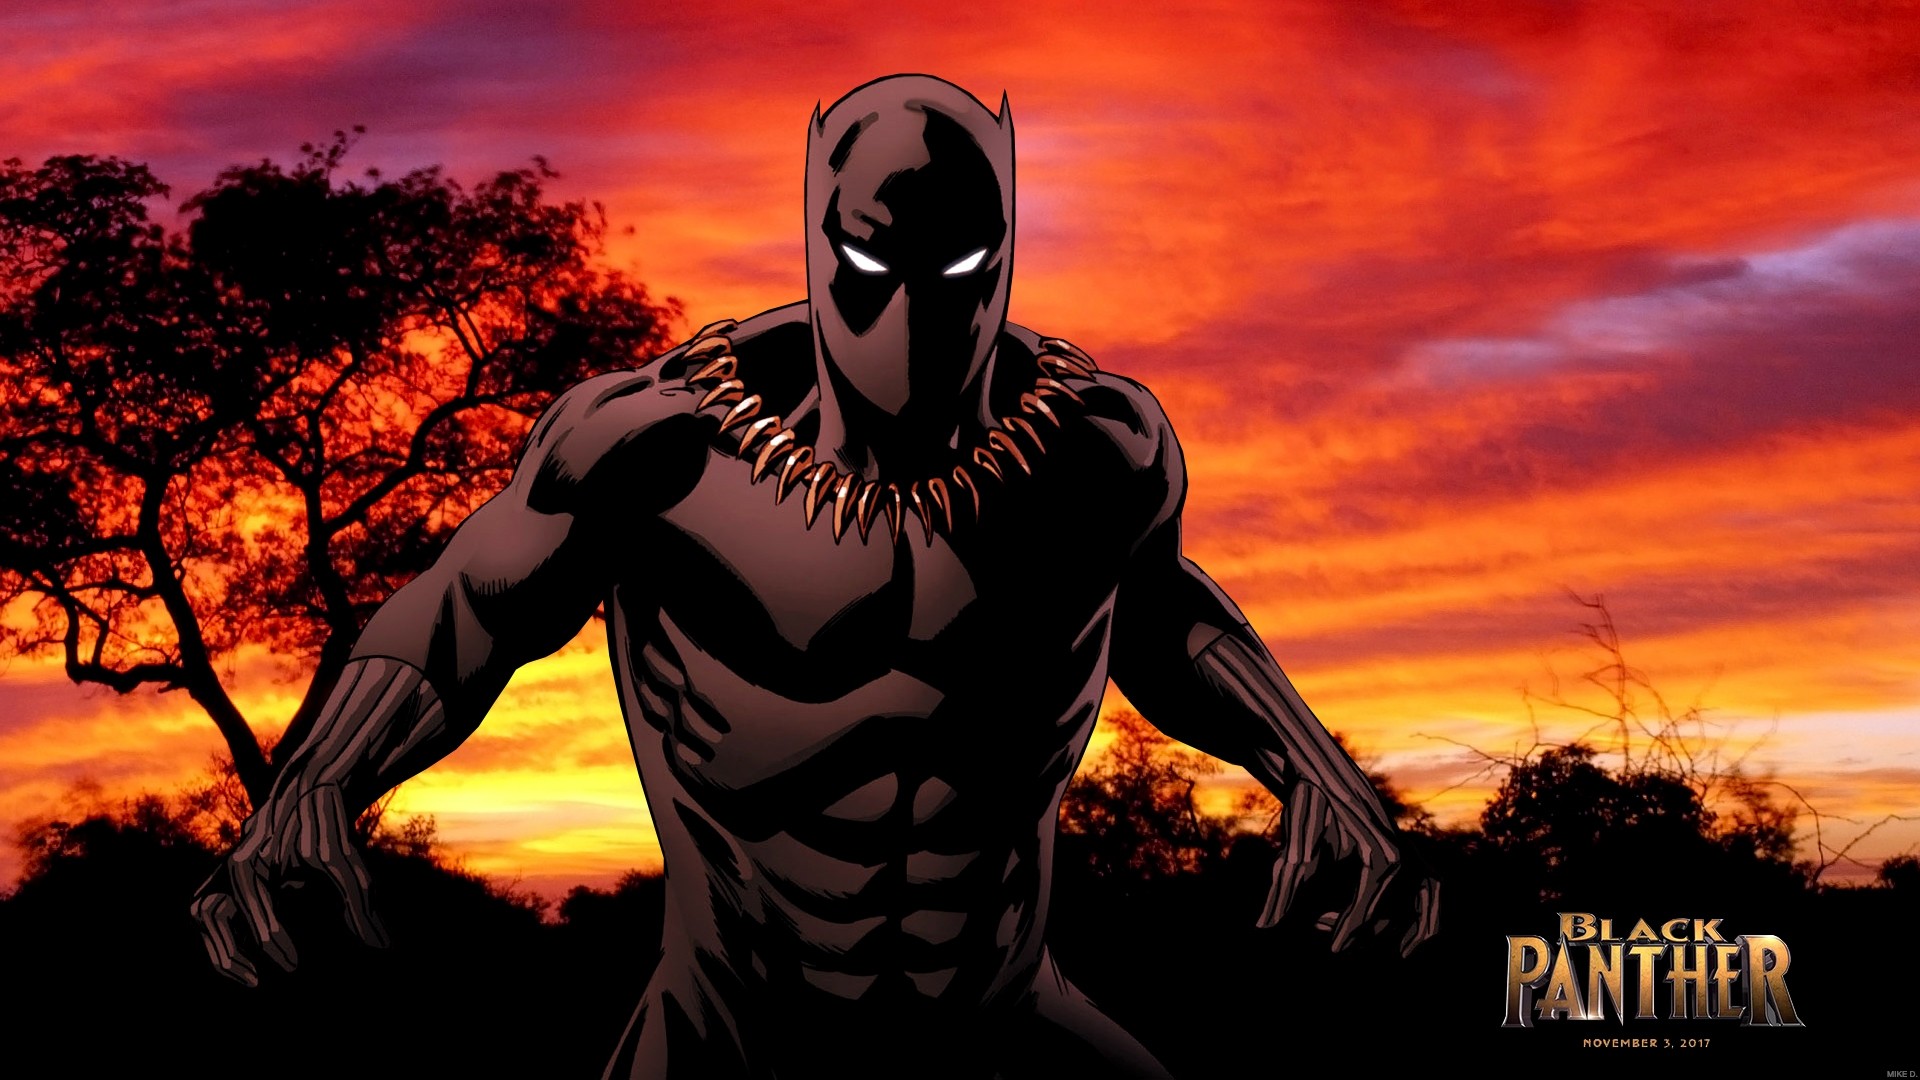 Black Panther wallpaper ·① Download free amazing HD backgrounds for